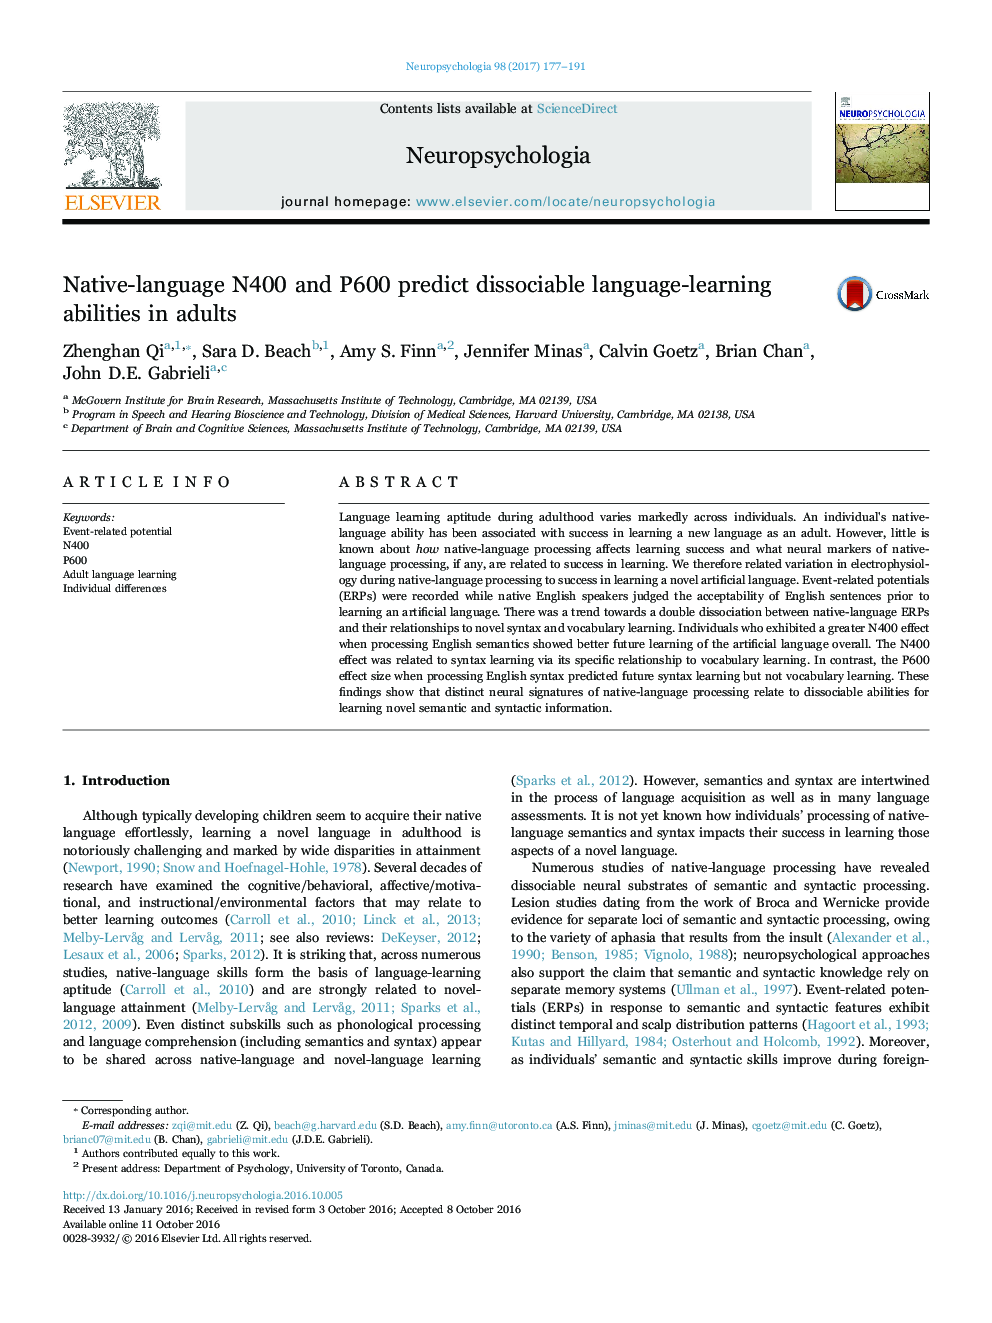 Native-language N400 and P600 predict dissociable language-learning abilities in adults